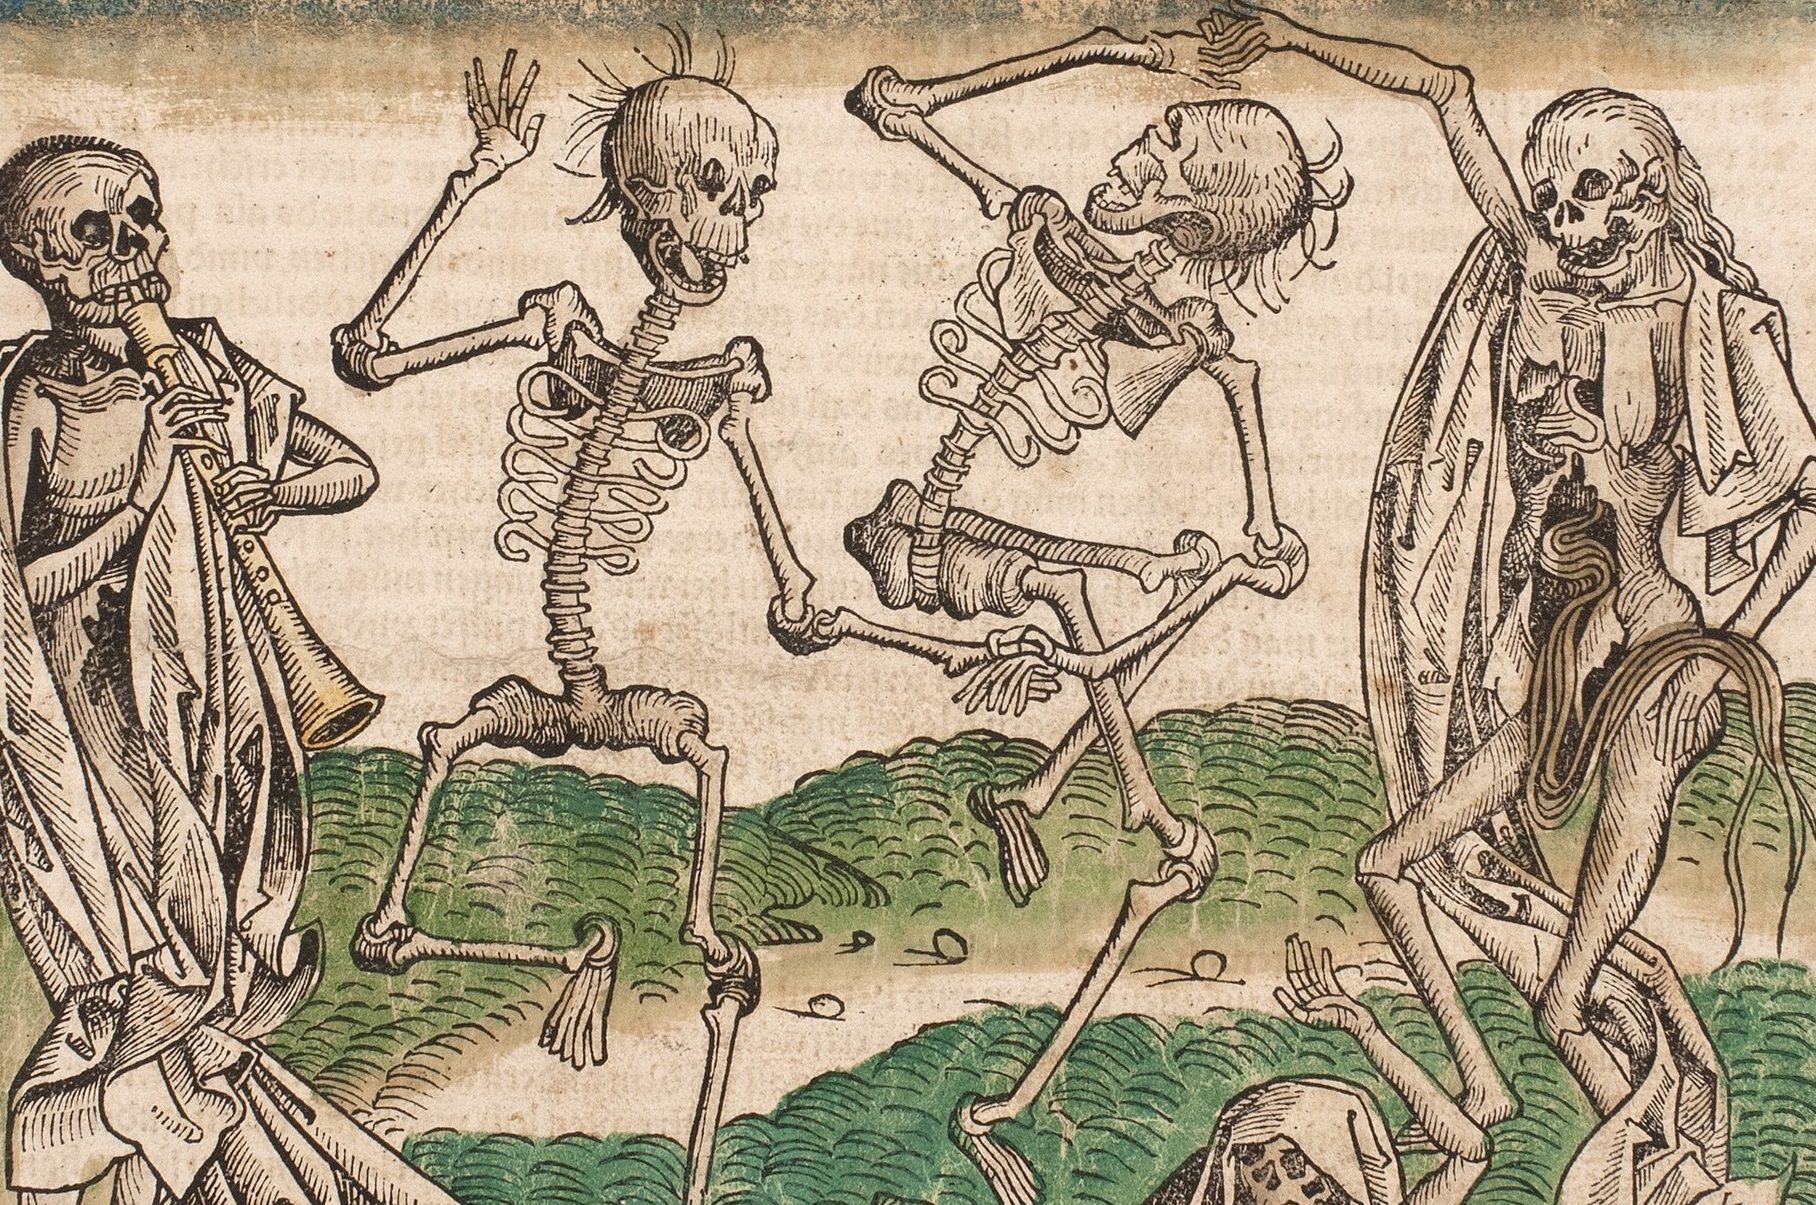 the image depicts five skeletons two in the middle dancing while one on the furthest left corner plays a clarinet type of instrument and the one on the furthest right corner holds the hand for a skeleton in the middle of a spin while using its other hand to pull out its own entrails. the fifth skeletons head is all that is visible its in the middle bottom of the image